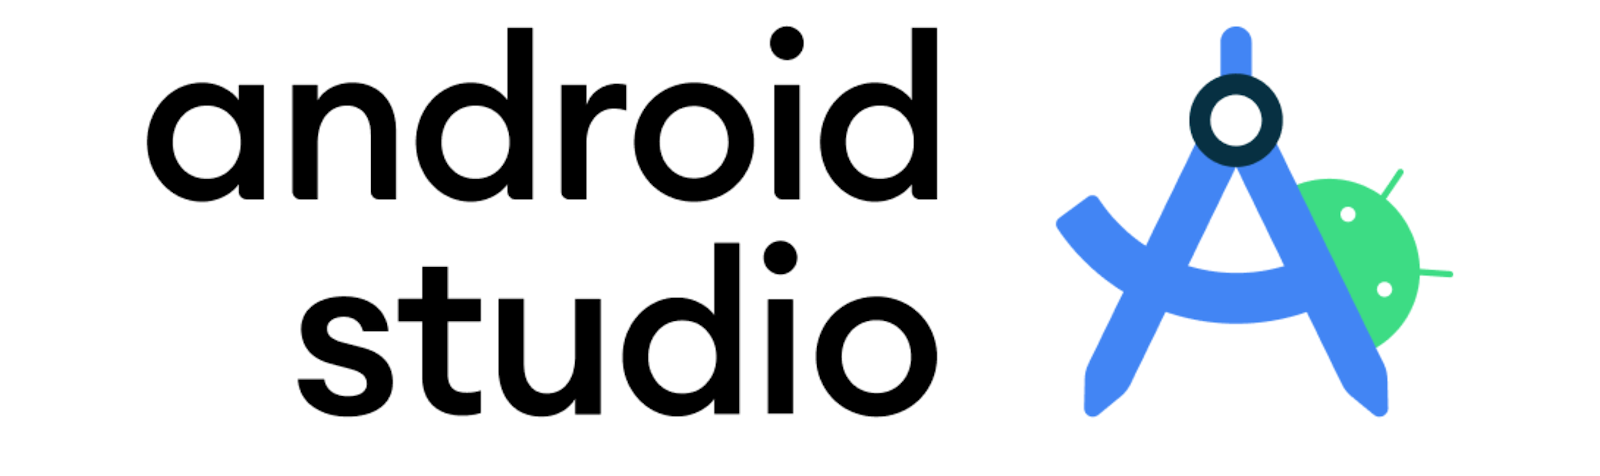 Can't open studio without requiring a login - Studio Bugs